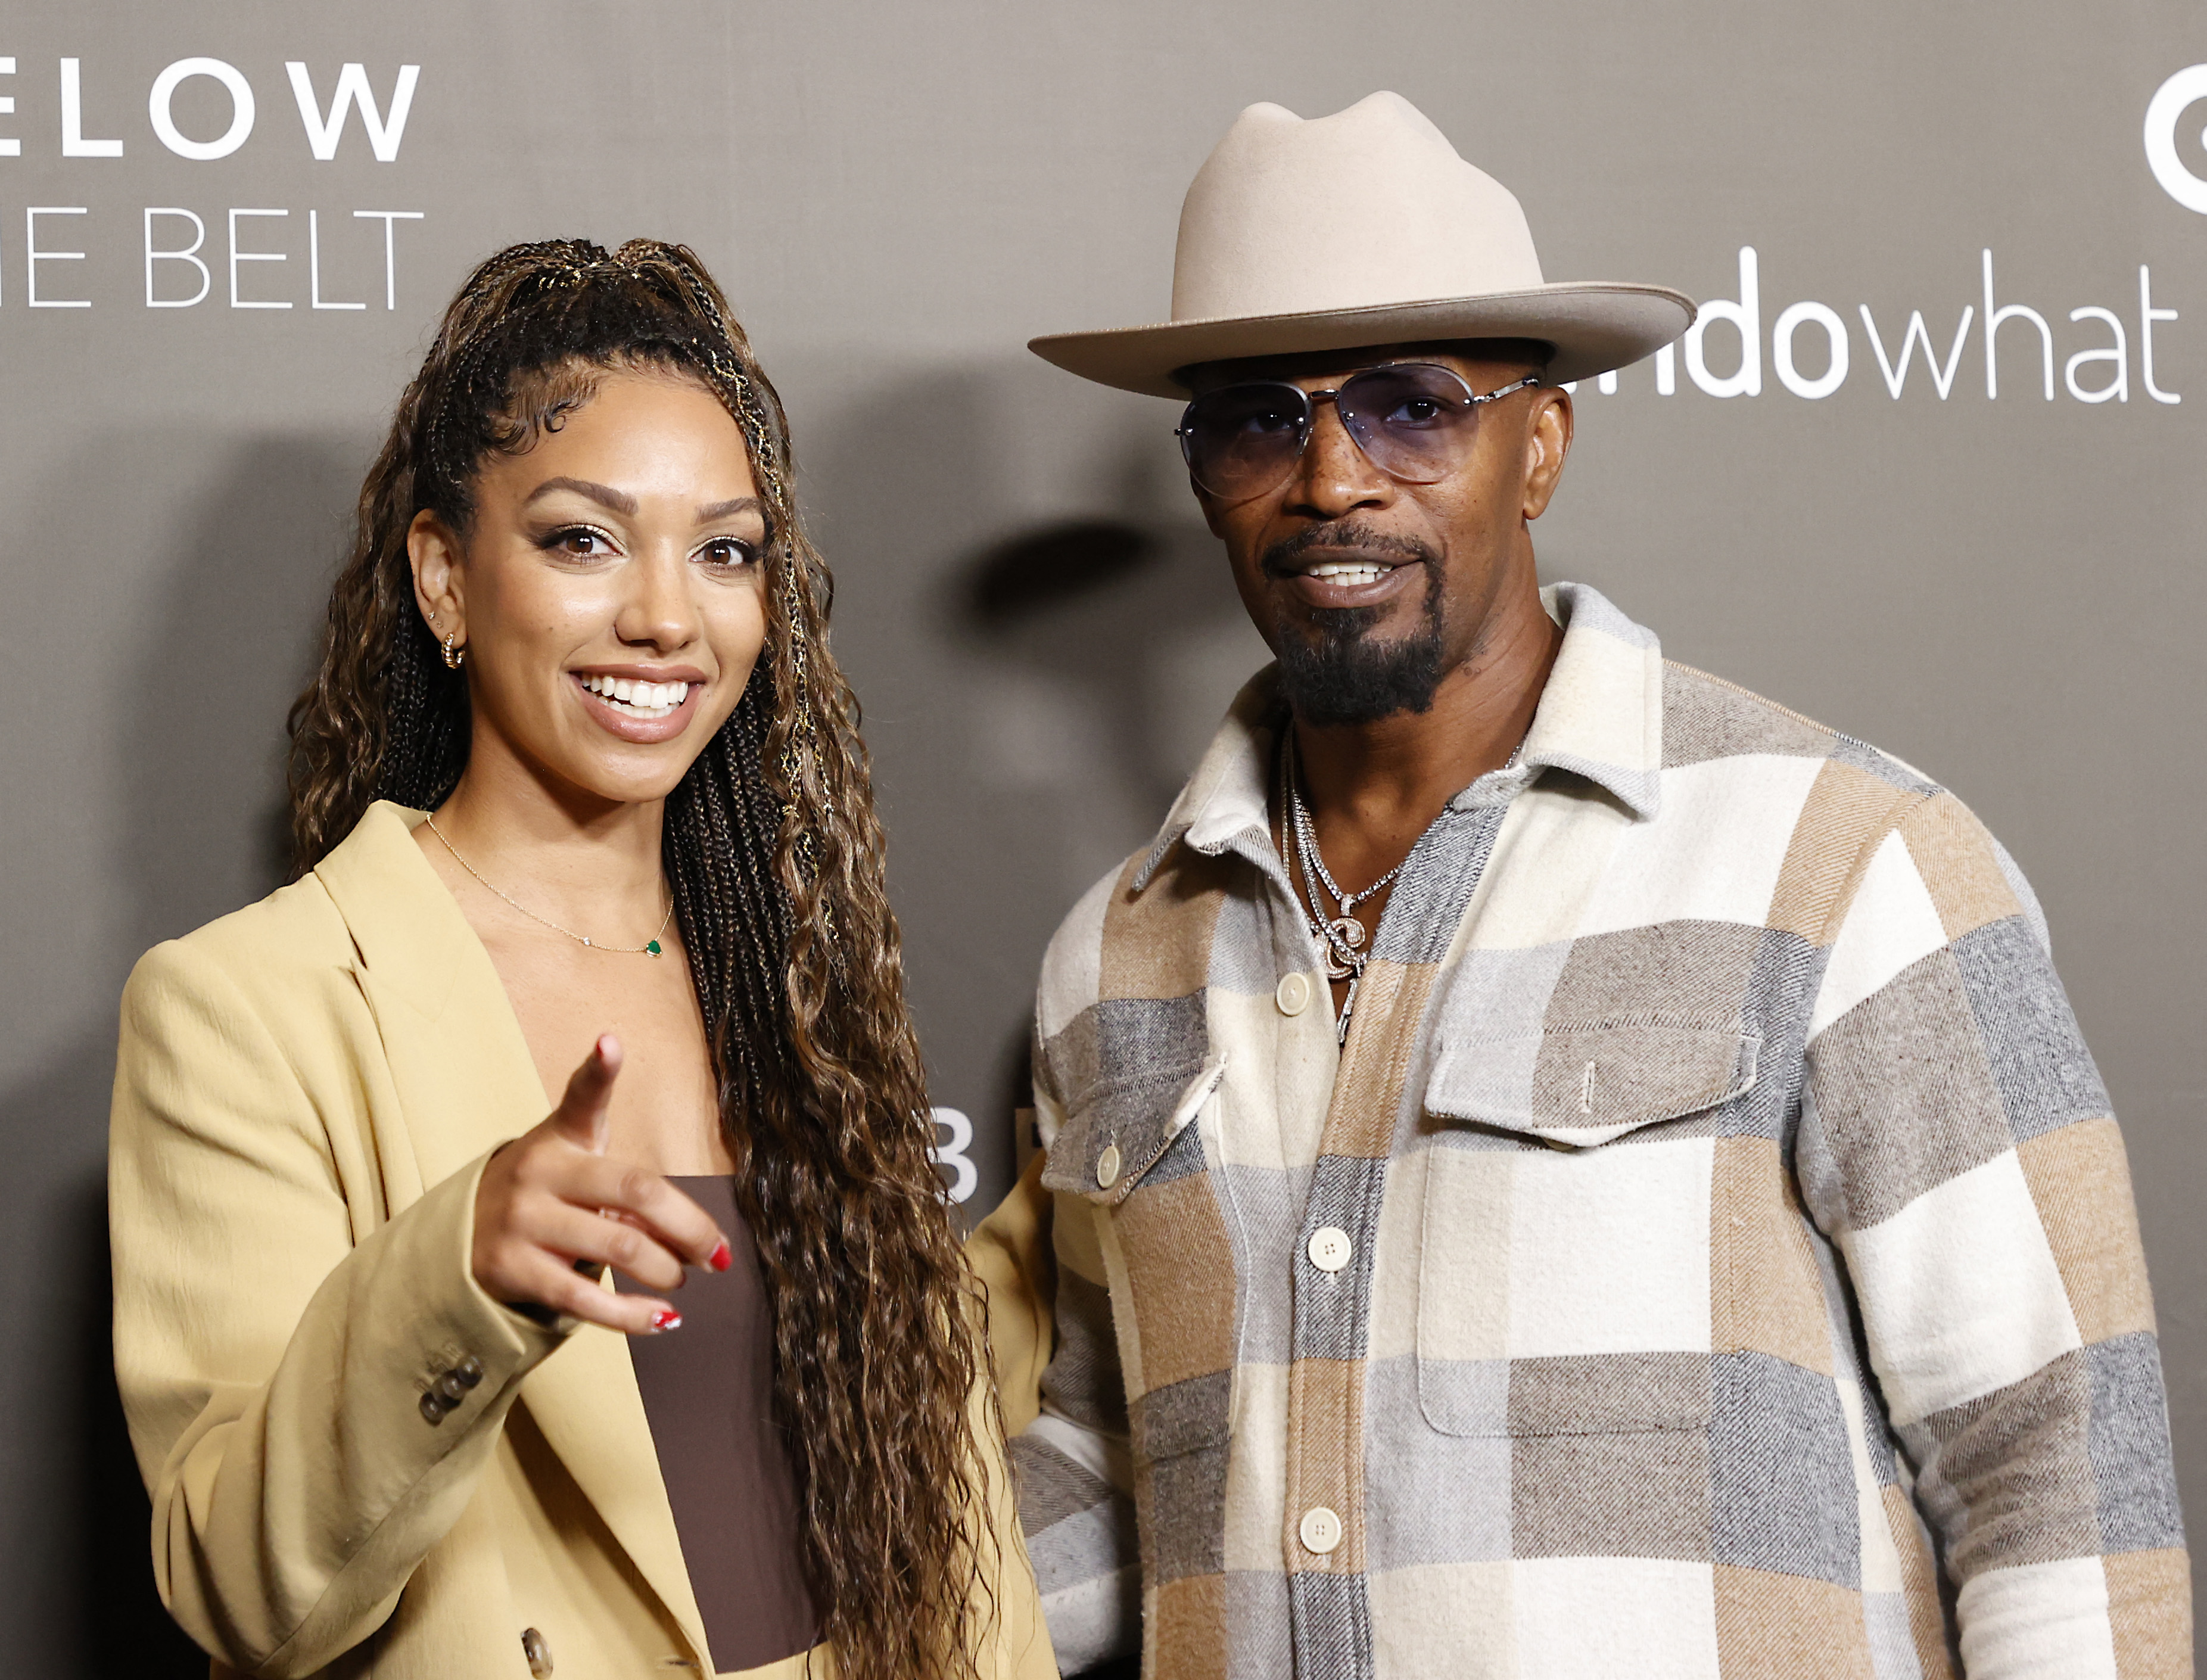 US actor Jamie Foxx and his daughter US producer Corinne Foxx arrive for the Los Angeles premiere of "Below the Belt" at the Directors Guild of America in Los Angeles, October 1, 2022 | Source: Getty Images